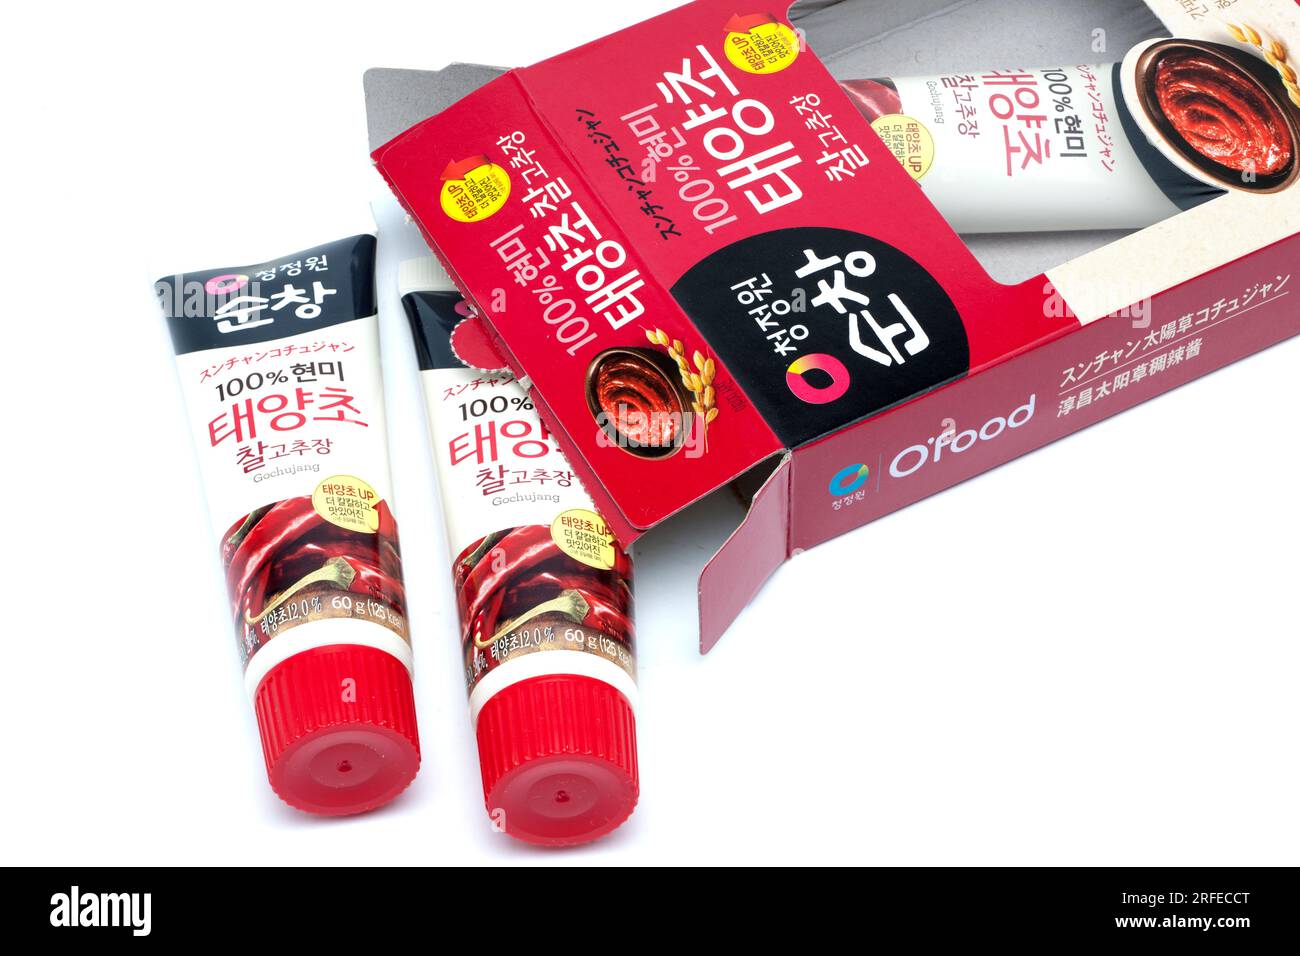 Three 60g Tubes and Box of Ofood Gochujang Red Pepper Paste from Korea Stock Photo